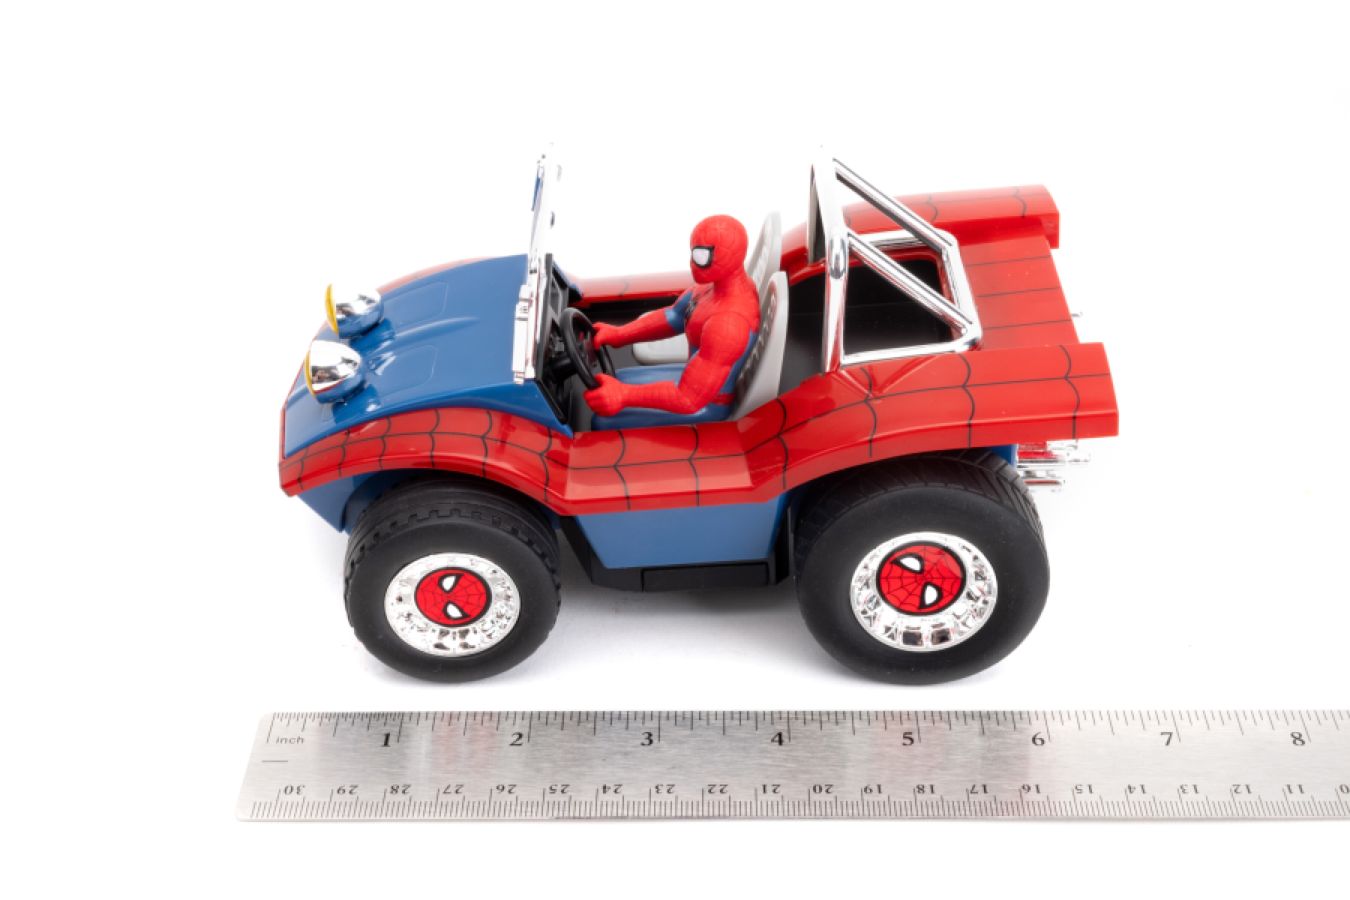 Hollywood Rides - Spider-Man Buggy 1:24 Scale Remote Control Car